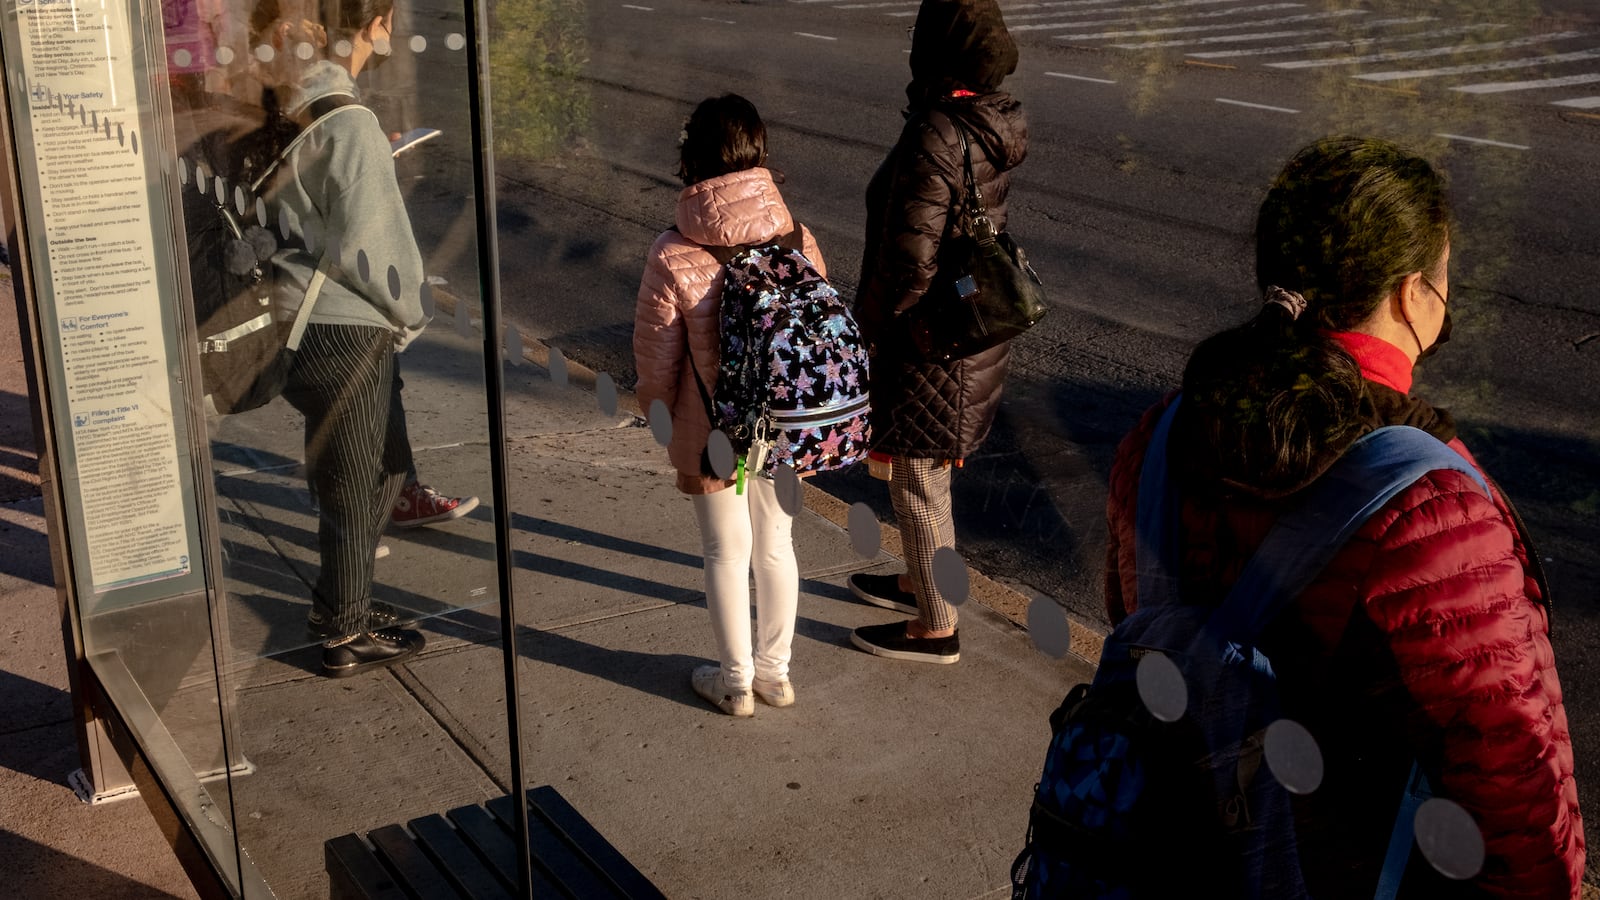 A woman stands with her two daughters and another woman at a city bus stop.